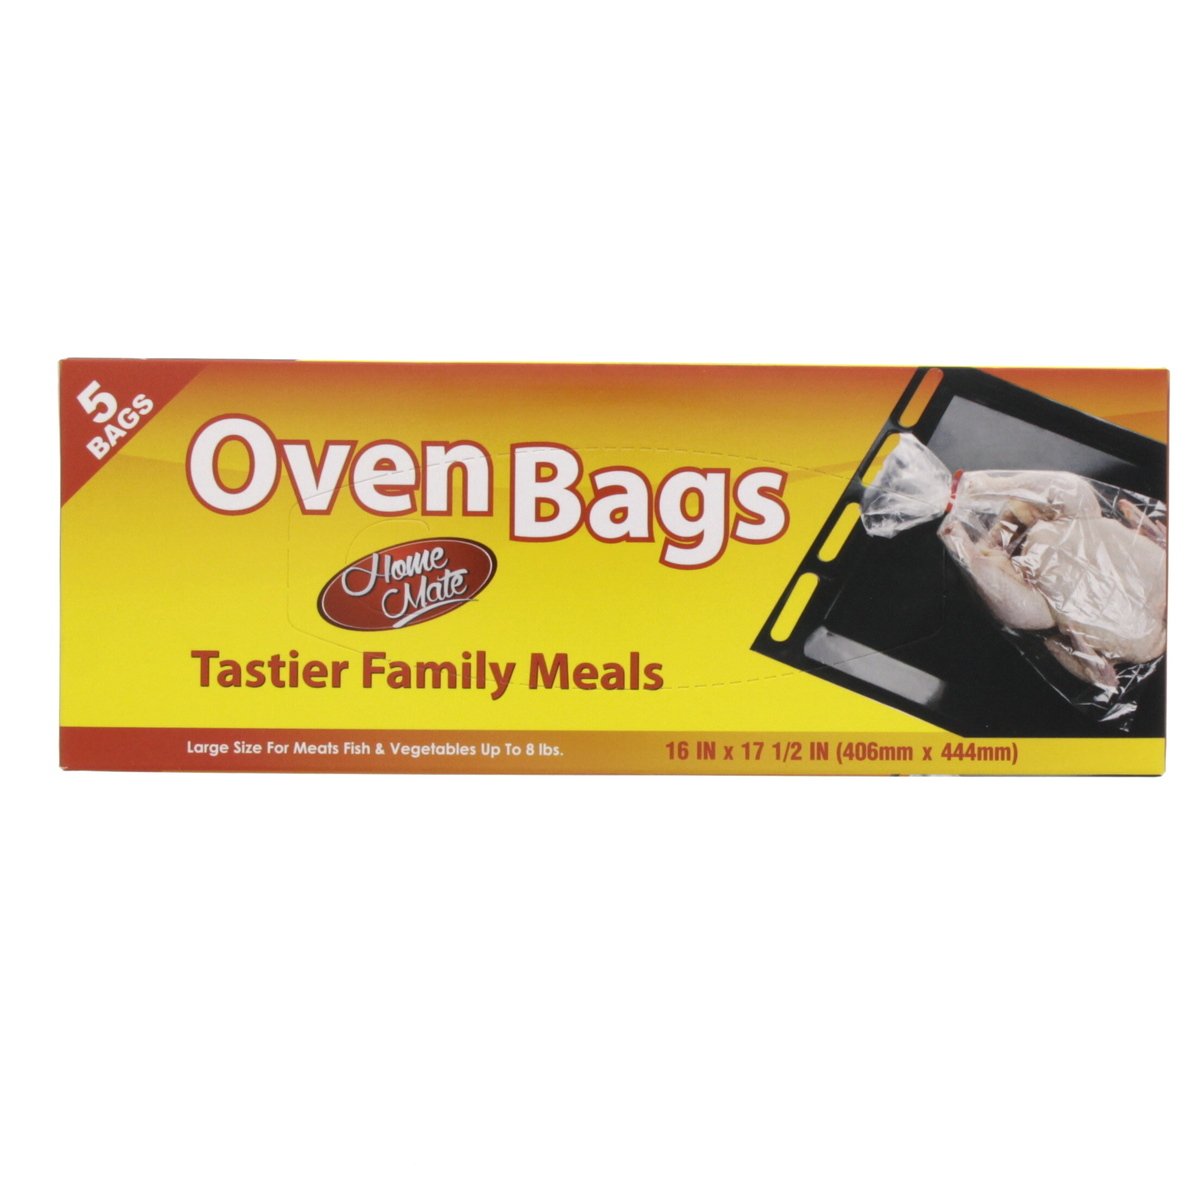 Home Mate Oven Bags Large Size 406mm x 444mm 5pcs